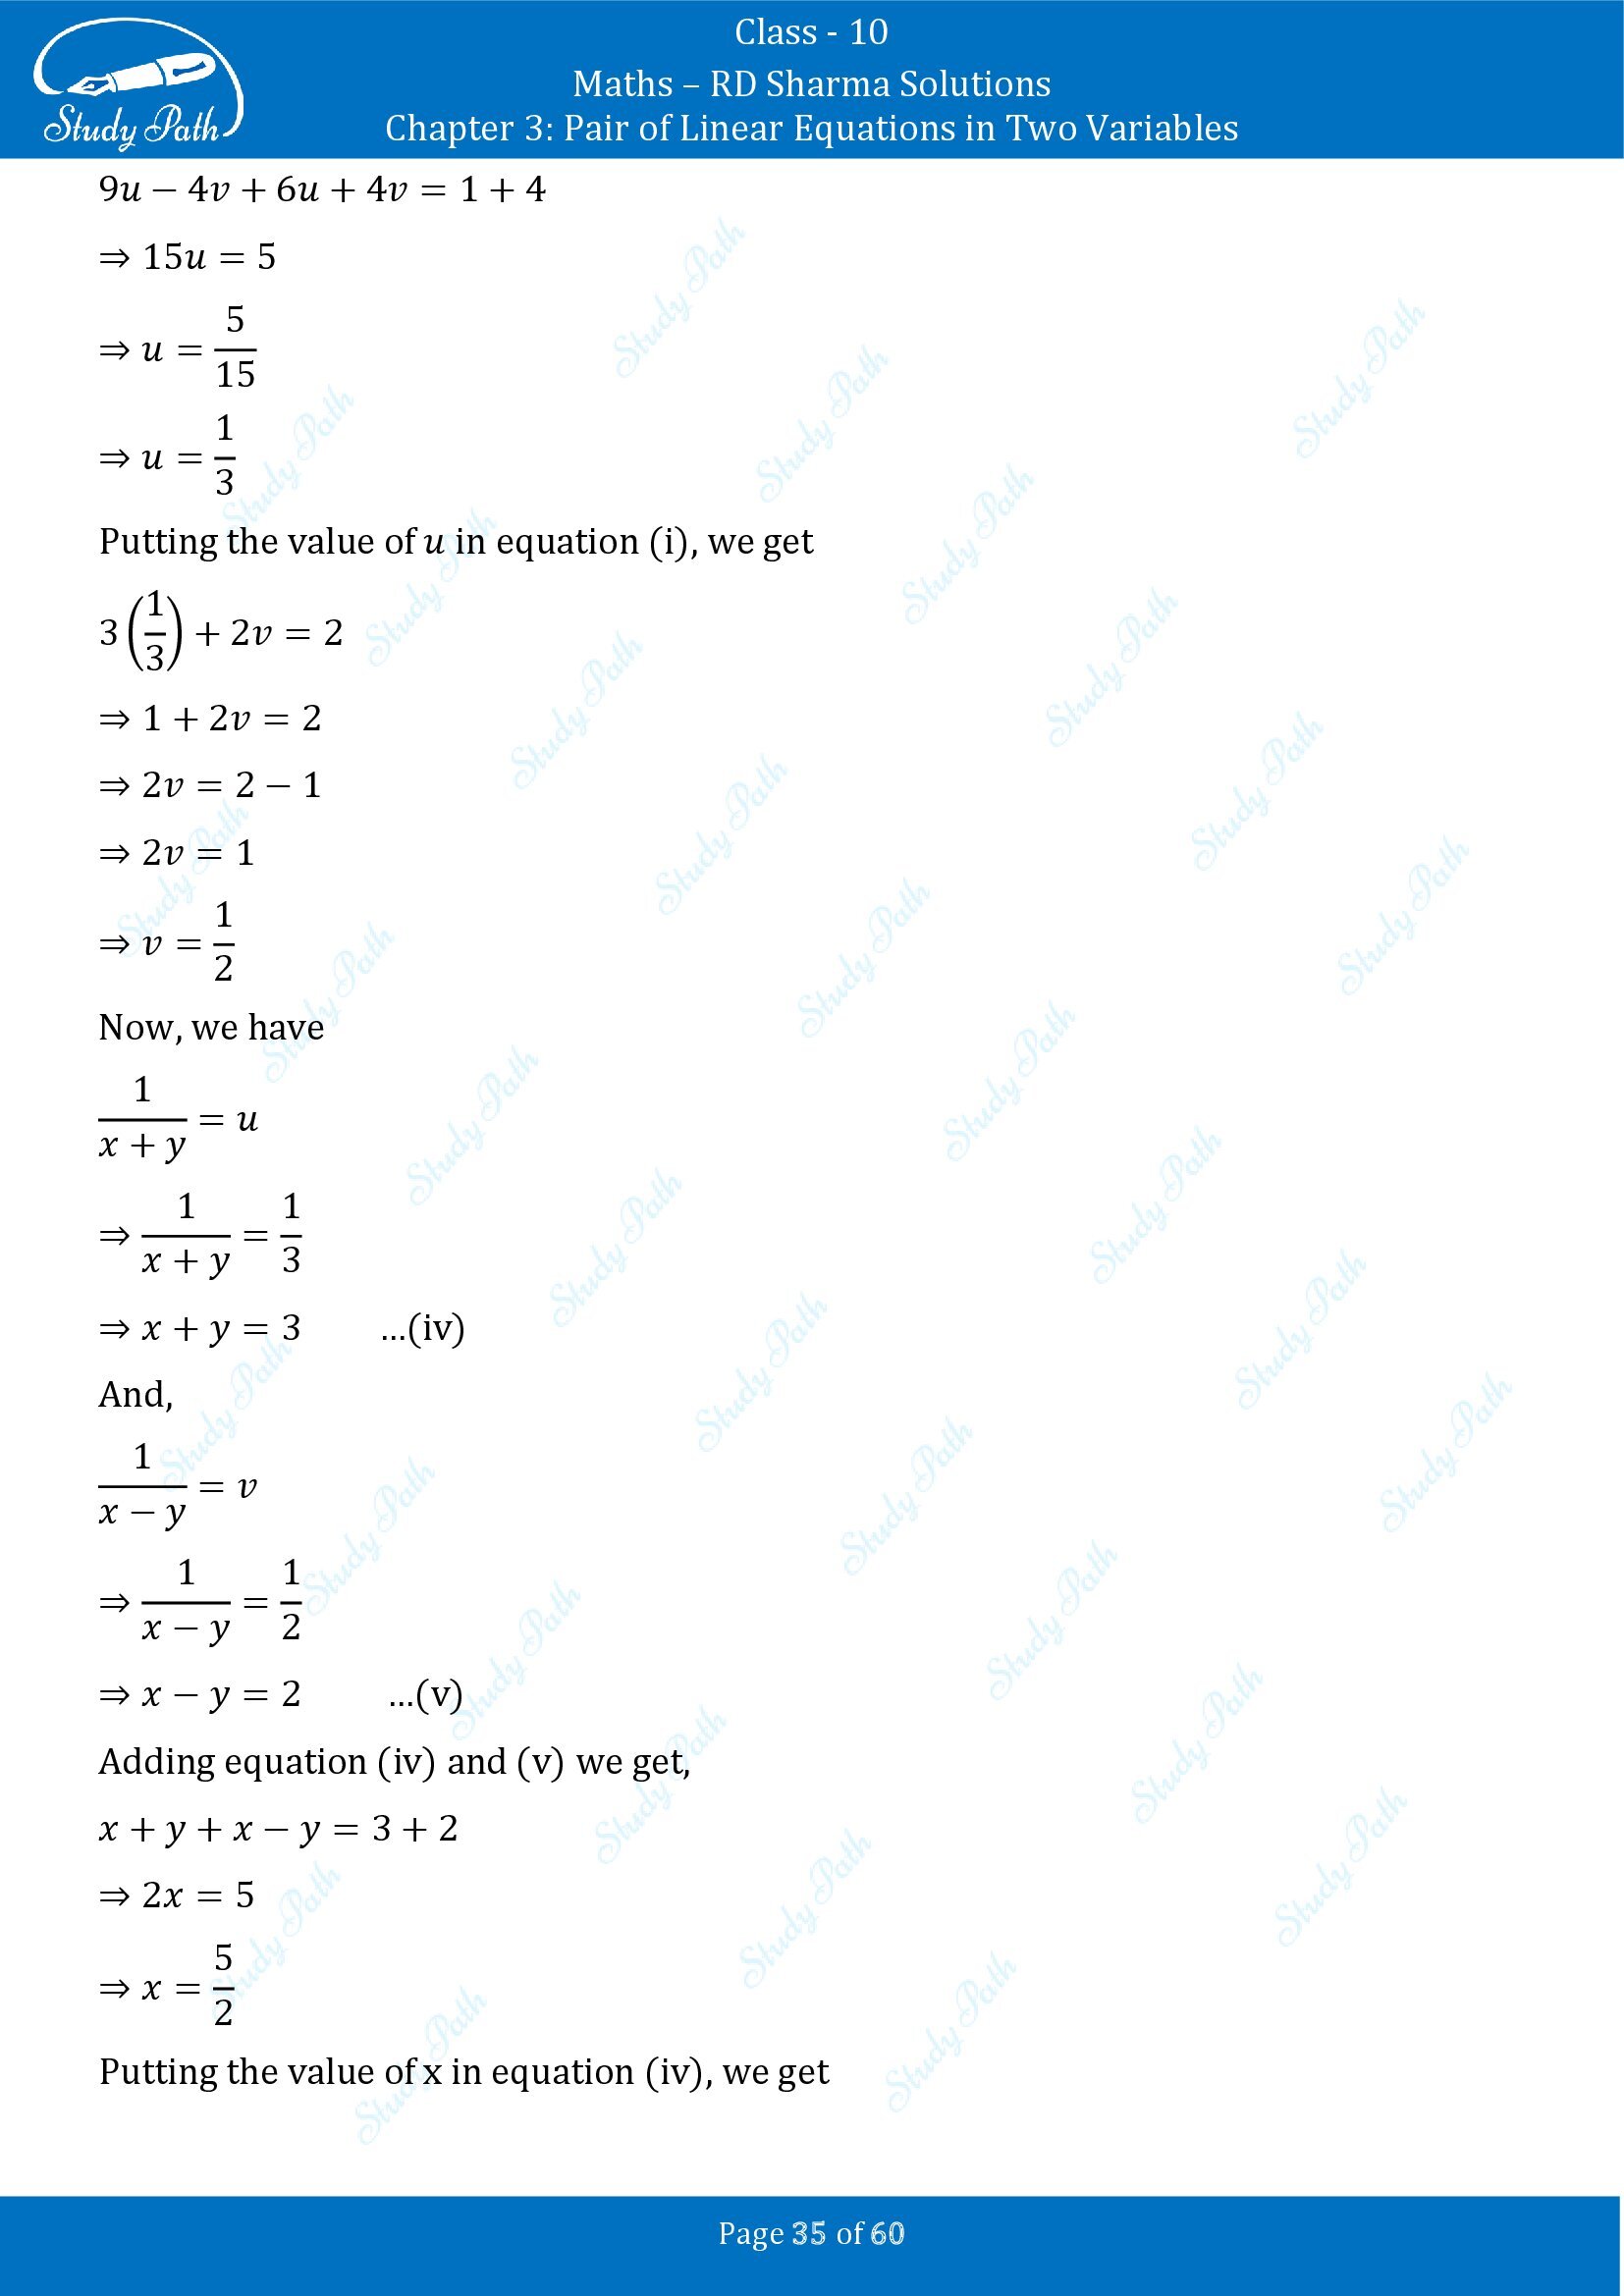 RD Sharma Solutions Class 10 Chapter 3 Pair of Linear Equations in Two Variables Exercise 3.3 00035